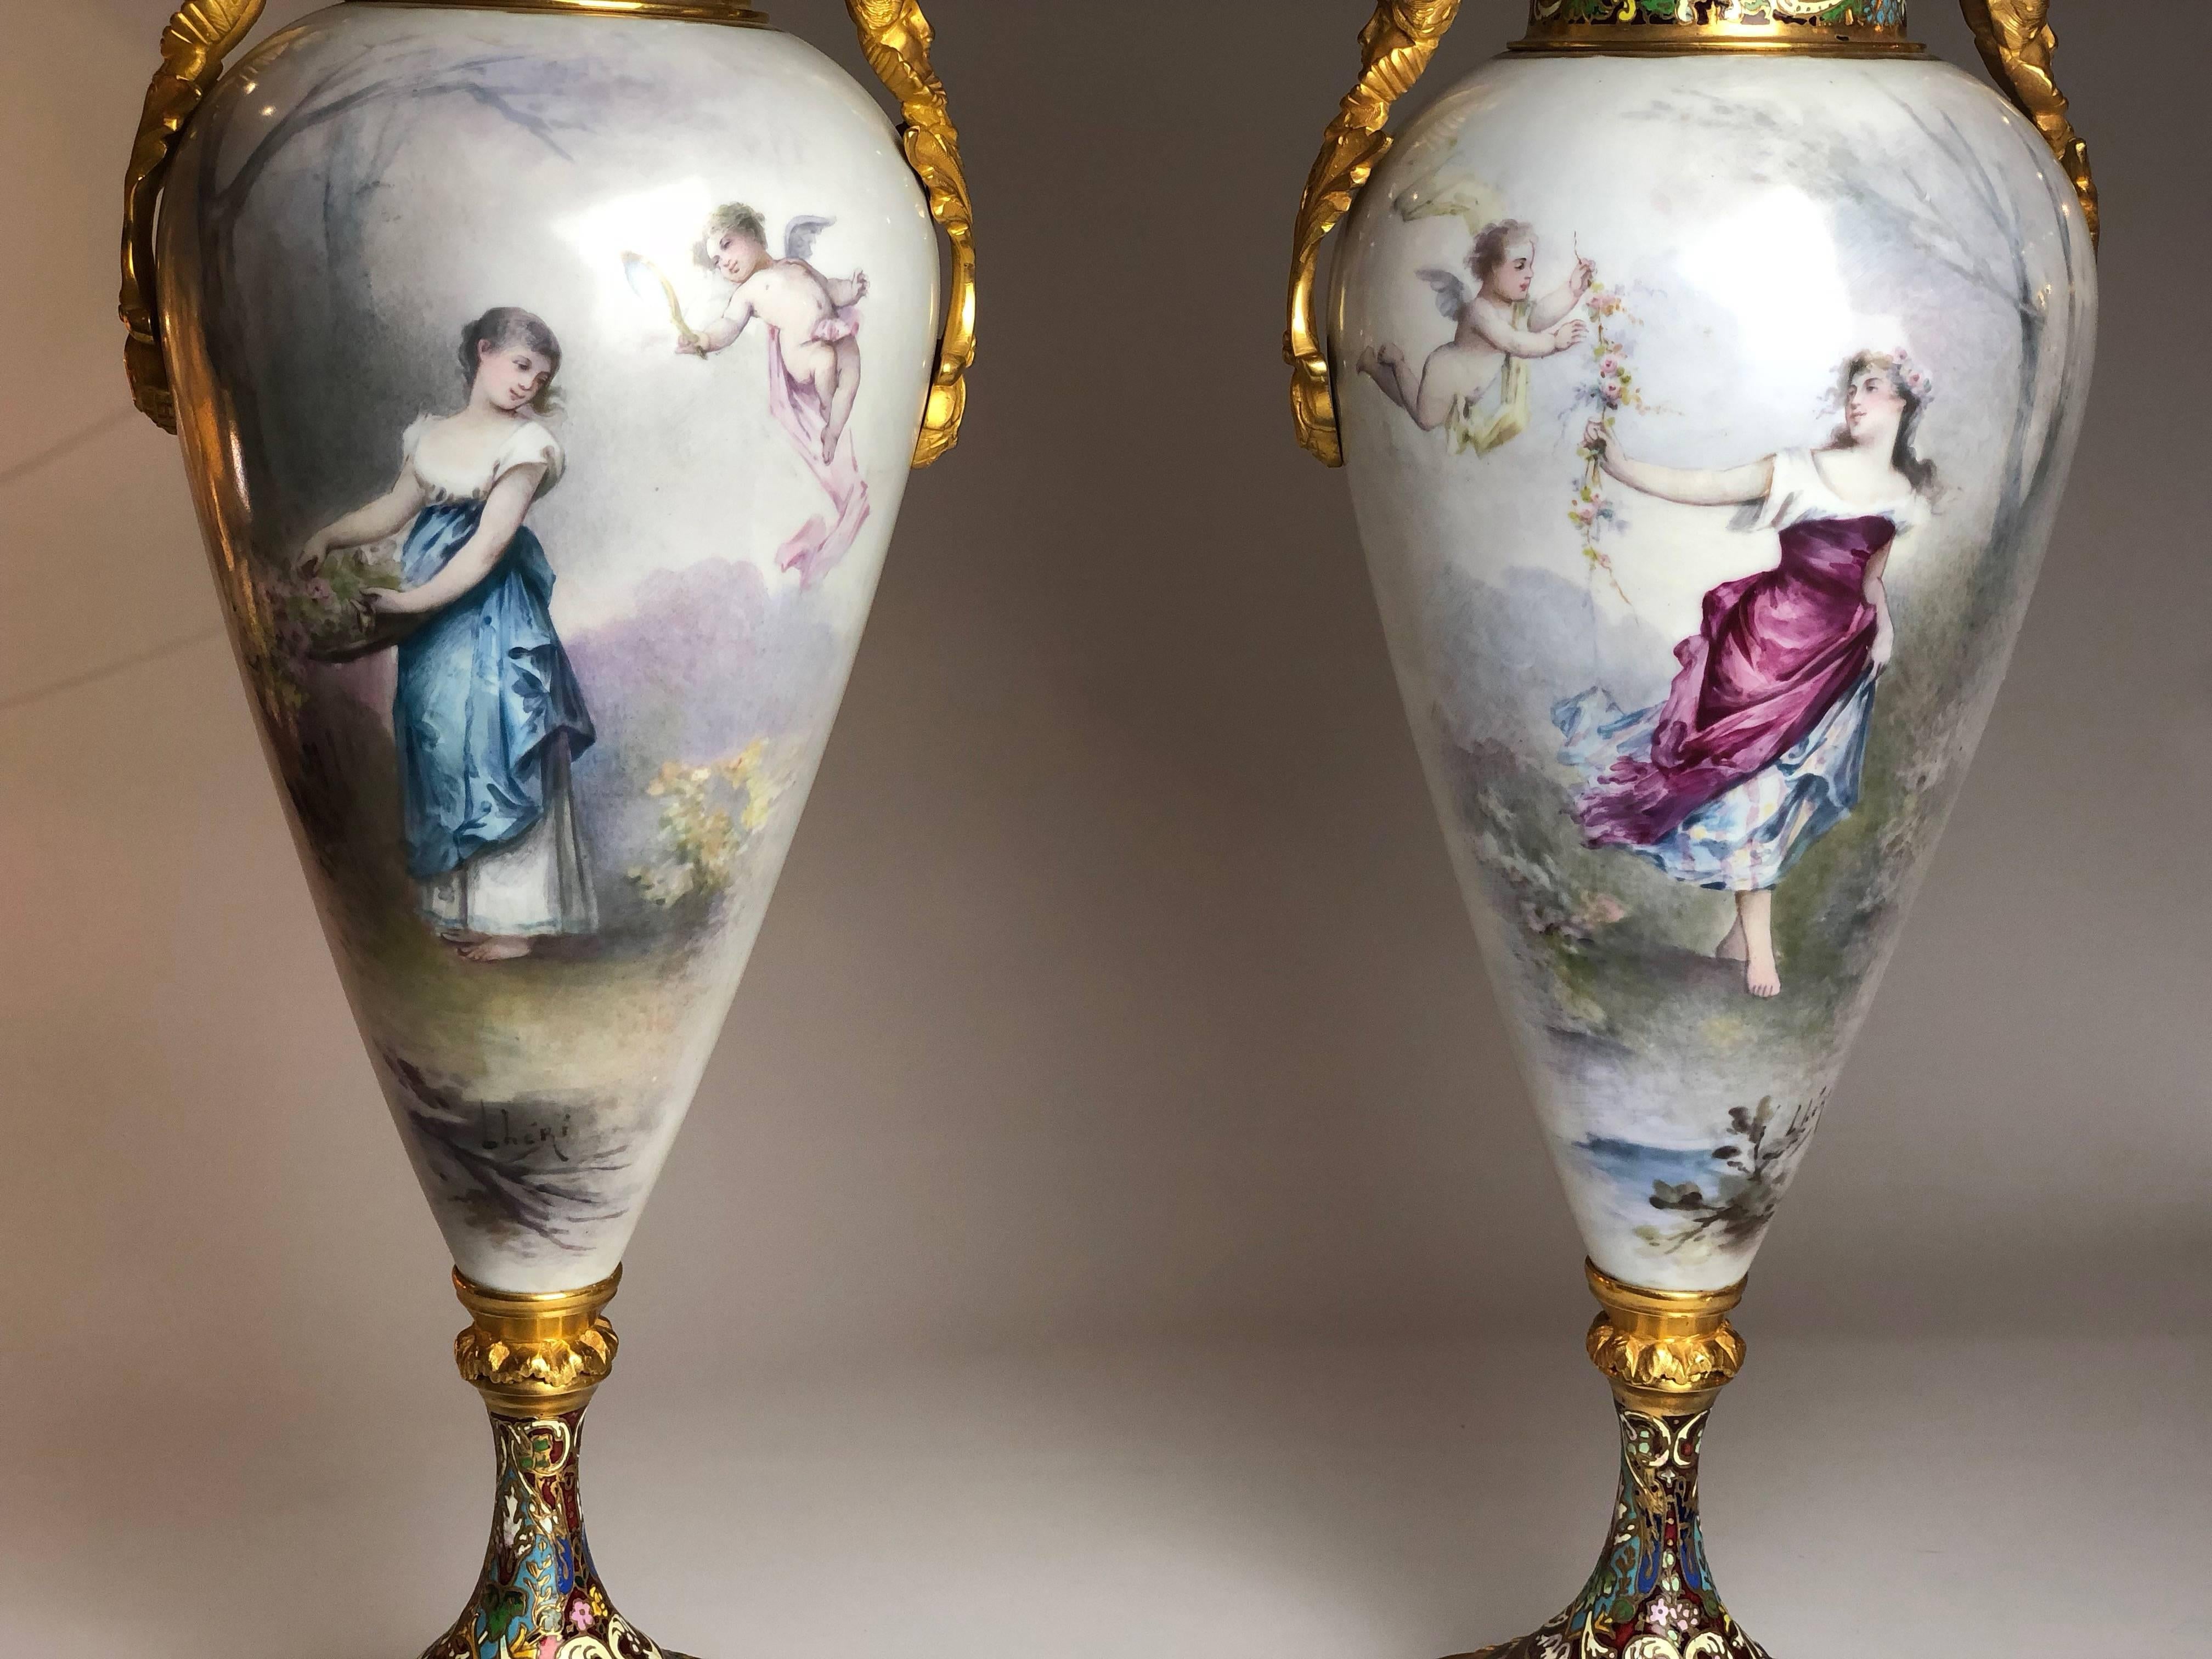 A fantastic pair of gilt bronze-mounted Sèvres vase, of the highest quality. Featuring exceptional cloisonné enamel

Both signed by the artist. 
French, circa 1870.

They stand 21